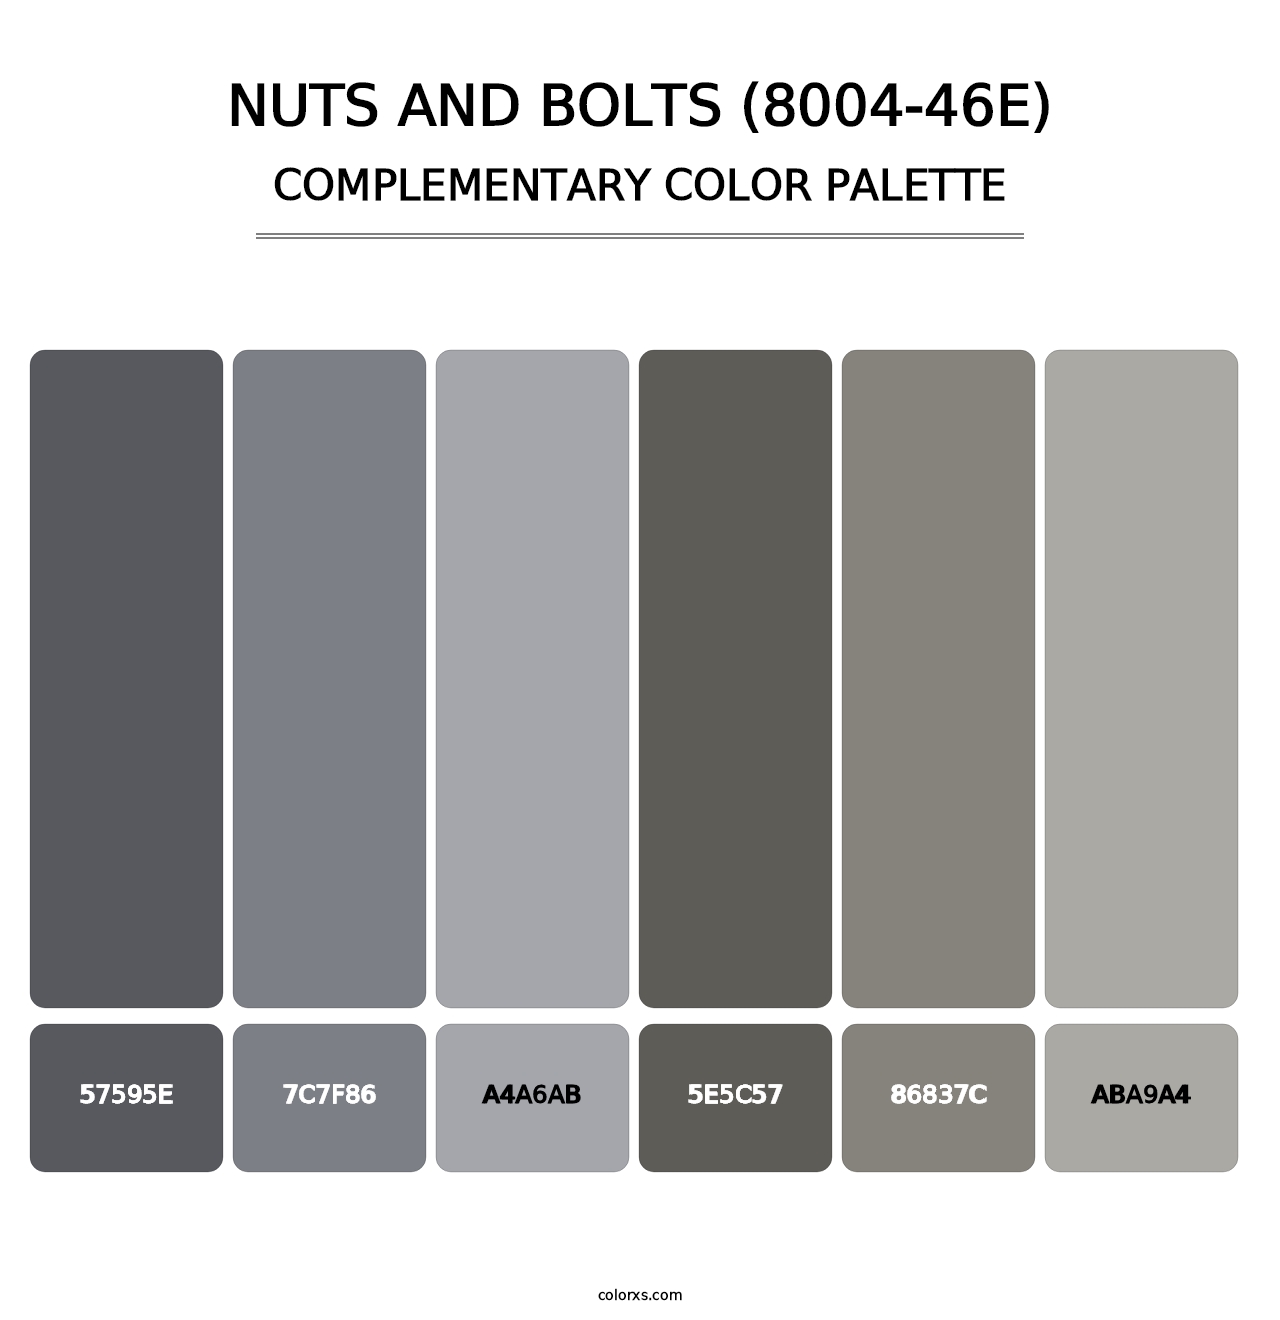 Nuts and Bolts (8004-46E) - Complementary Color Palette